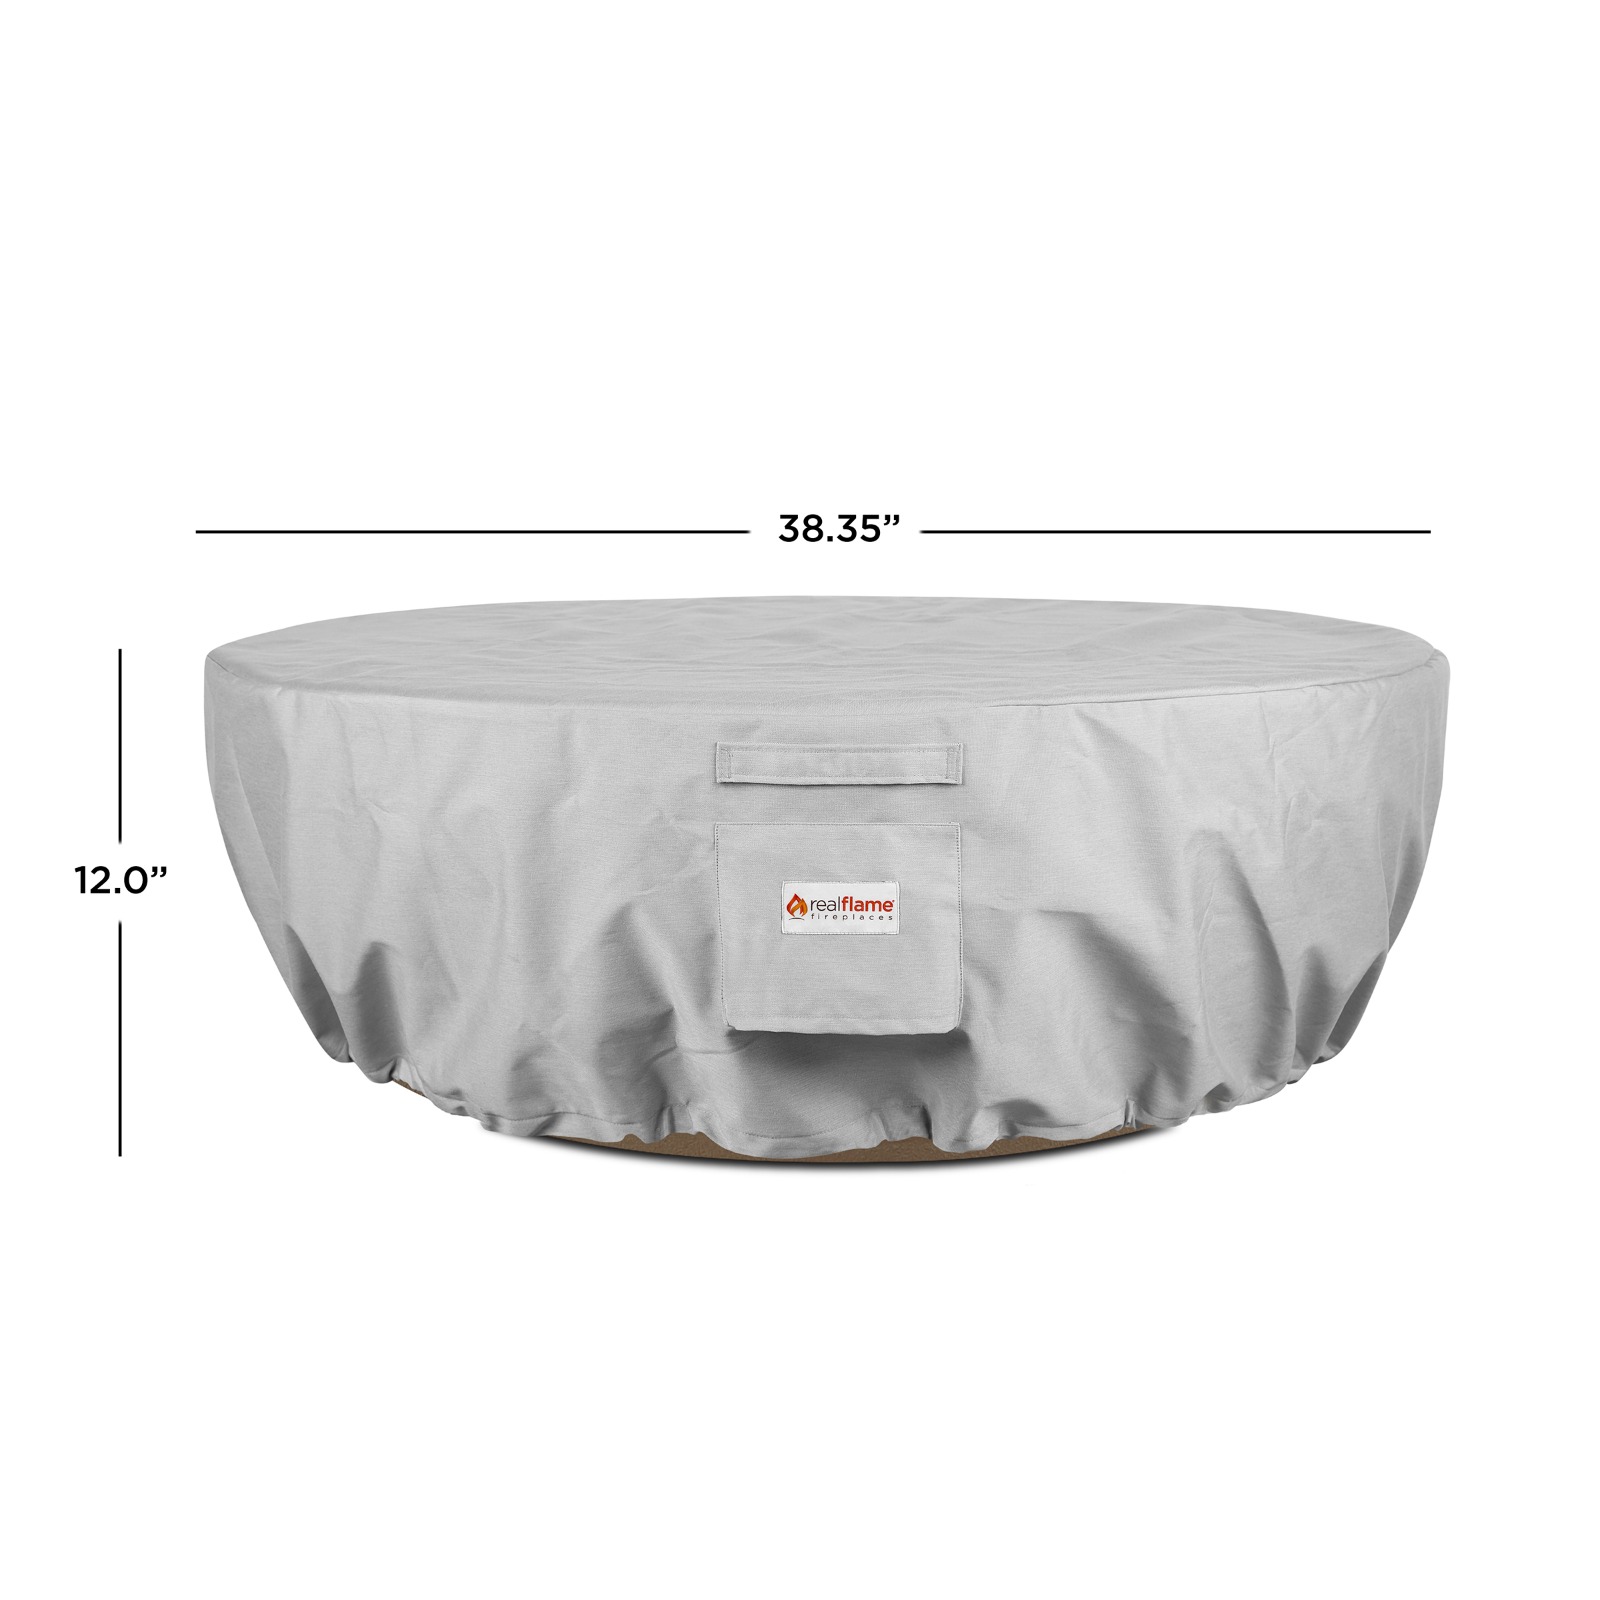 Riverside Fire Bowl Protective Fabric Cover with Drawstring dimensions.